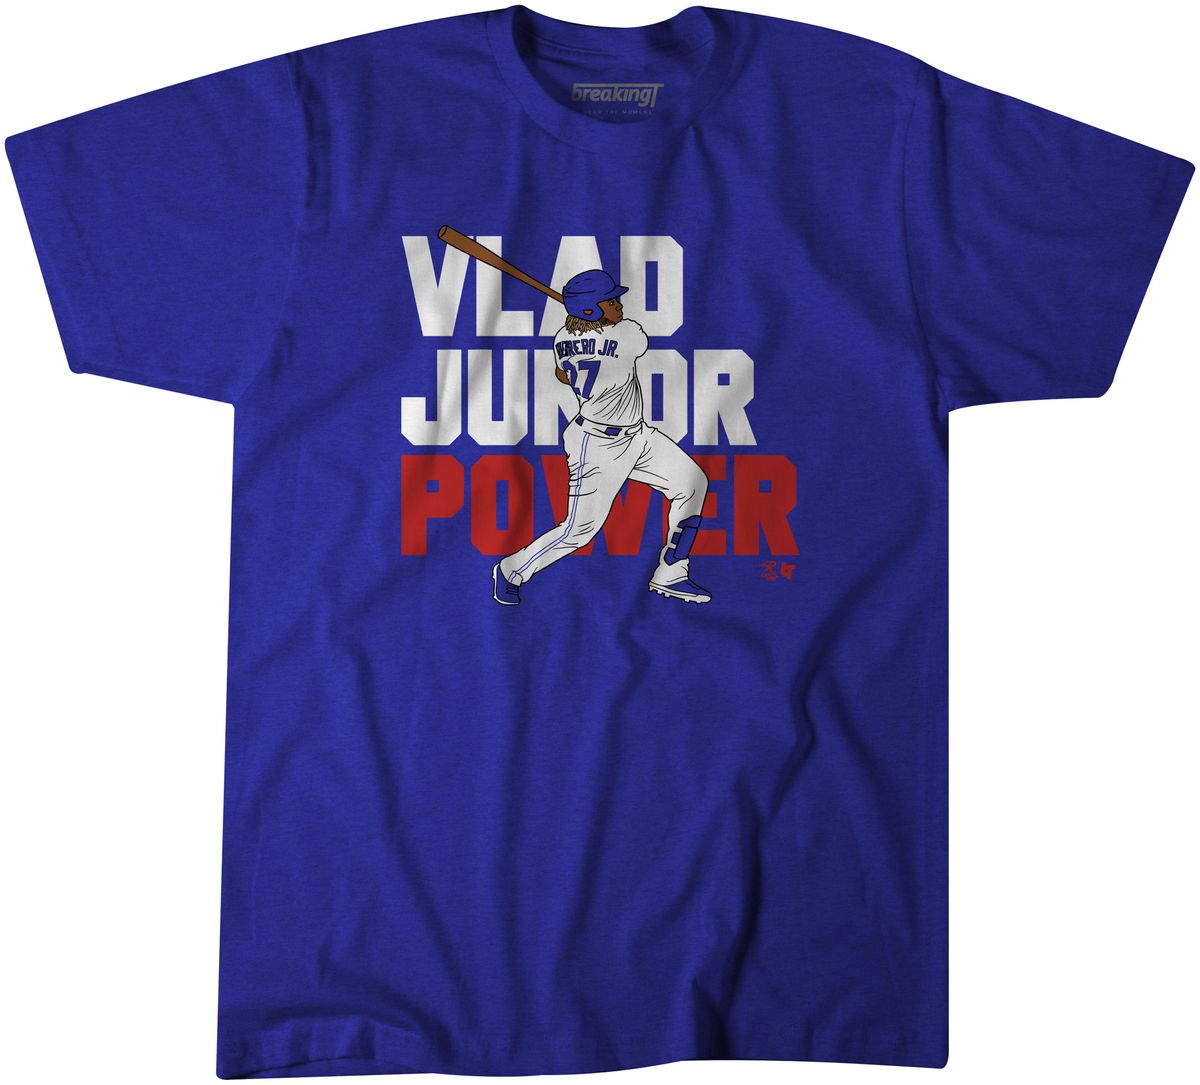 Illustration of Vladimir Guerrero Jr. swinging a bat in front of white and red text reading “Vlad Junior Power” on a Blue Jays blue t-shirt.